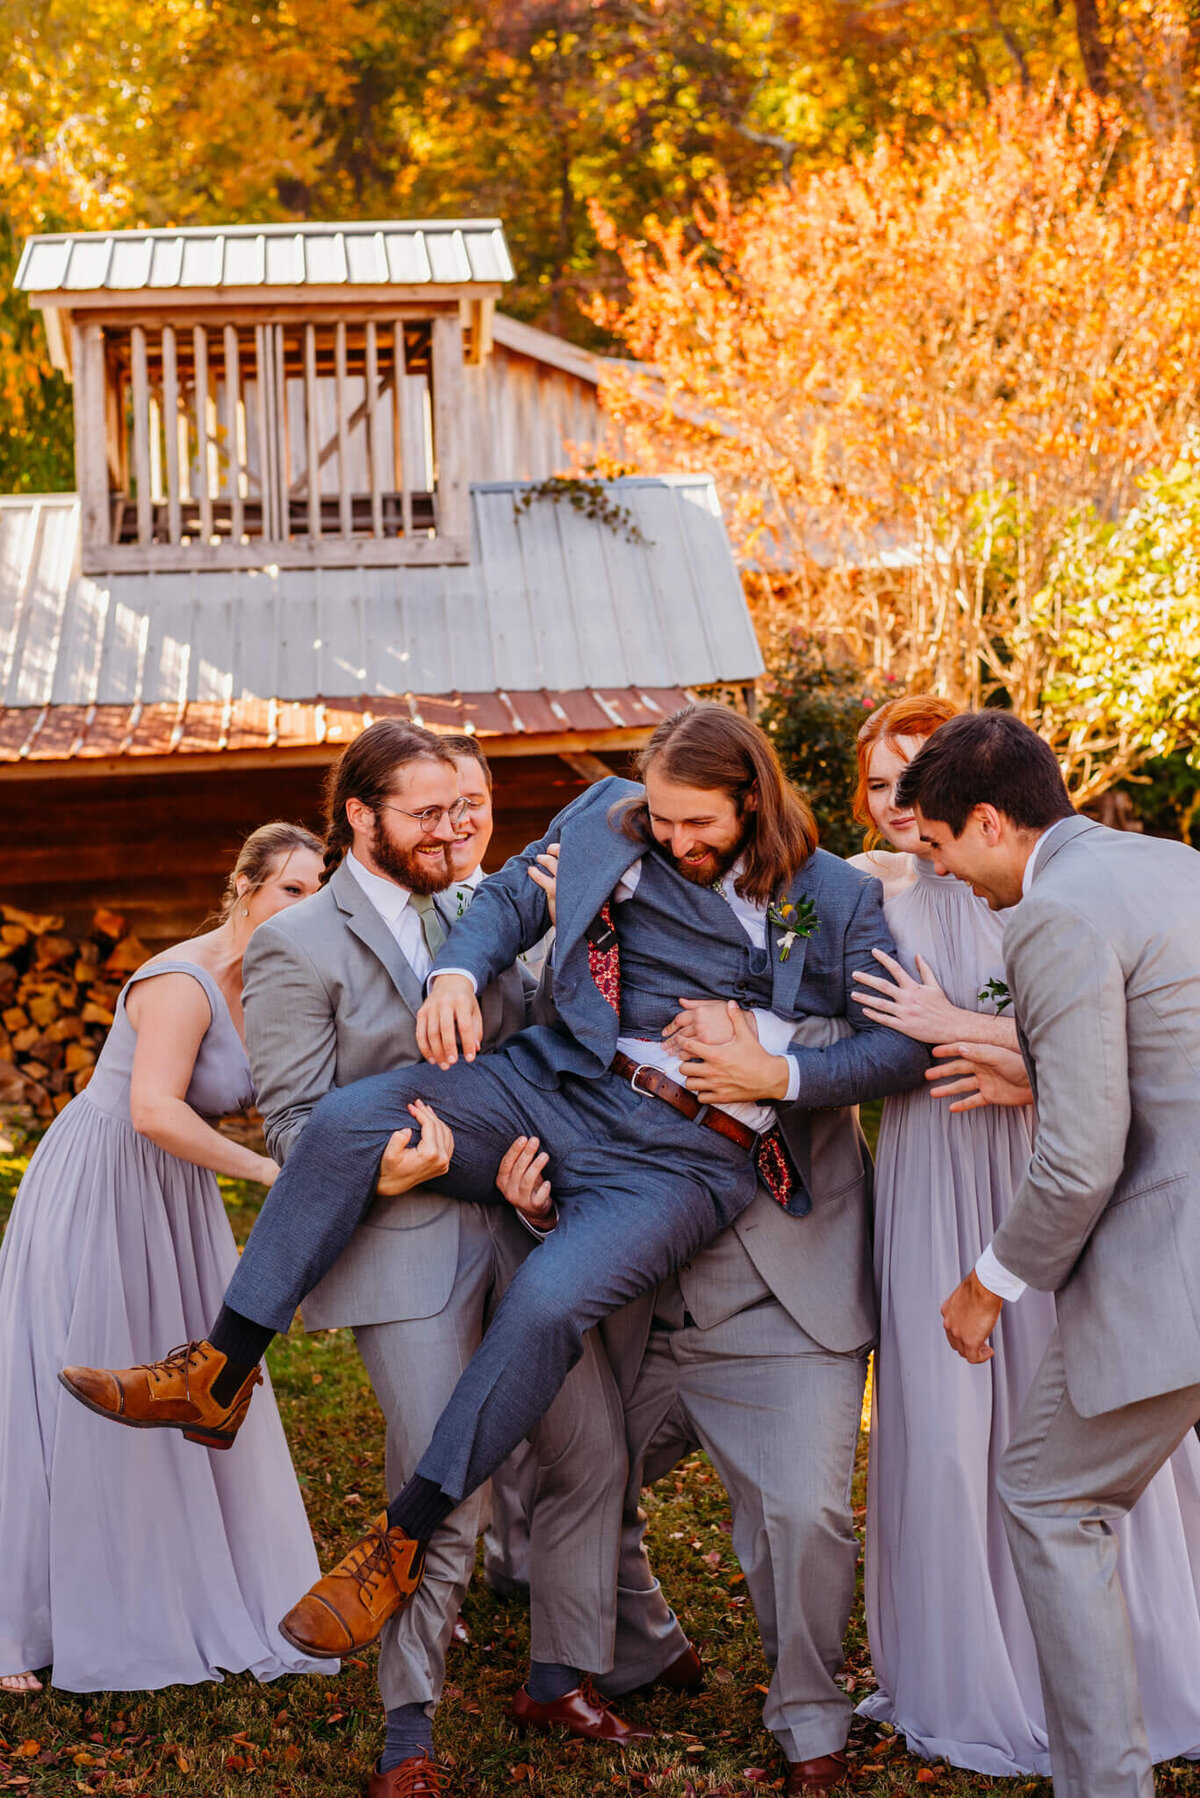 Photo of a Groom being picked up in a playful manner from his wedding party